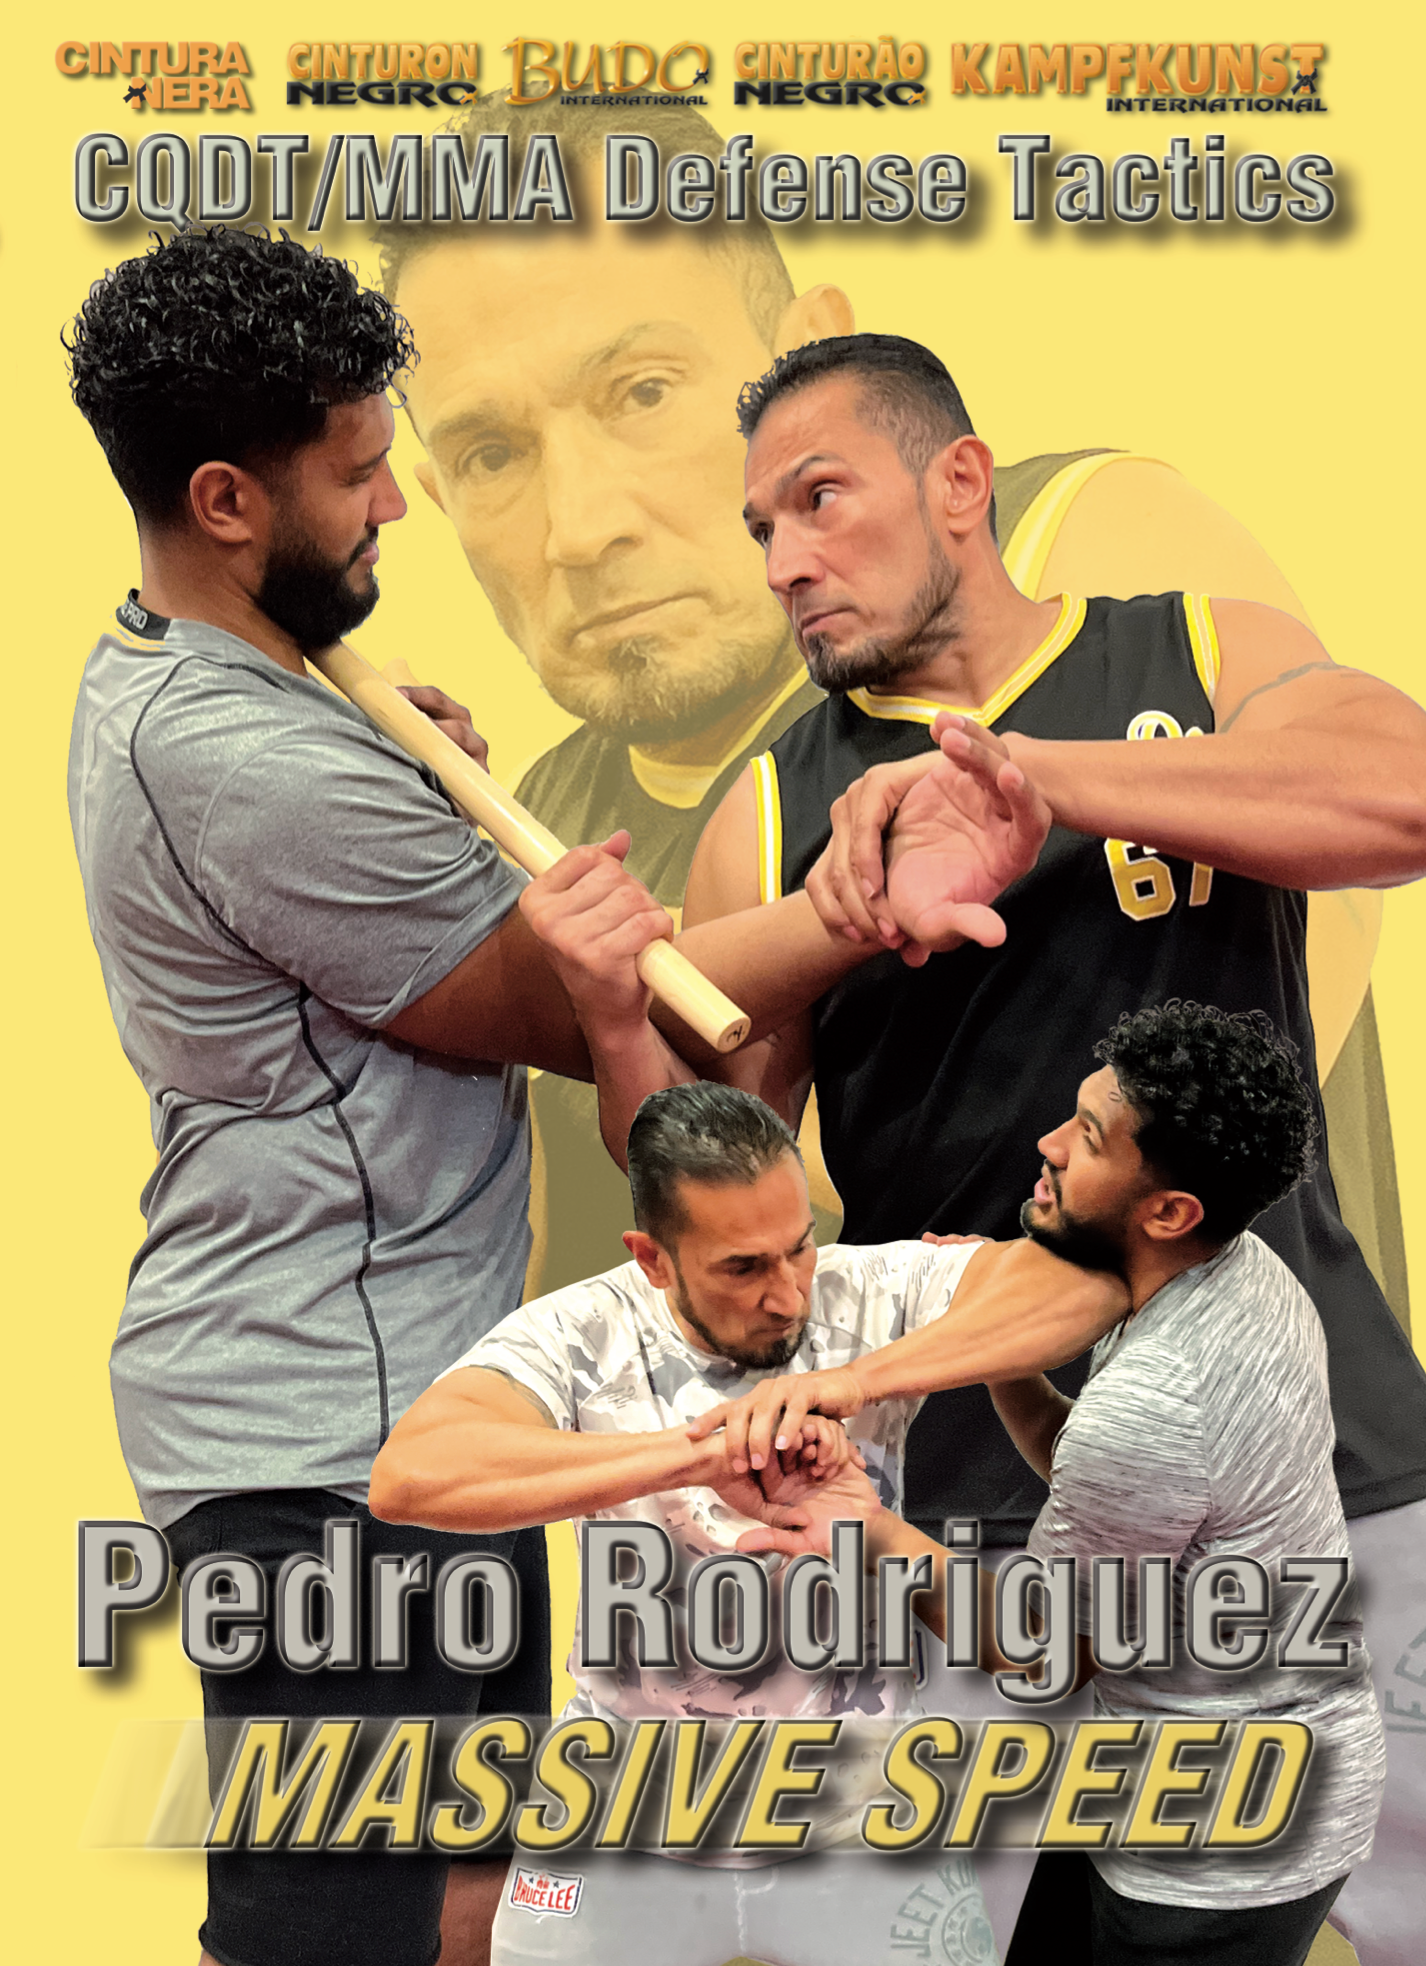 Practical Self Defense DVD by Pedro Rodriguez